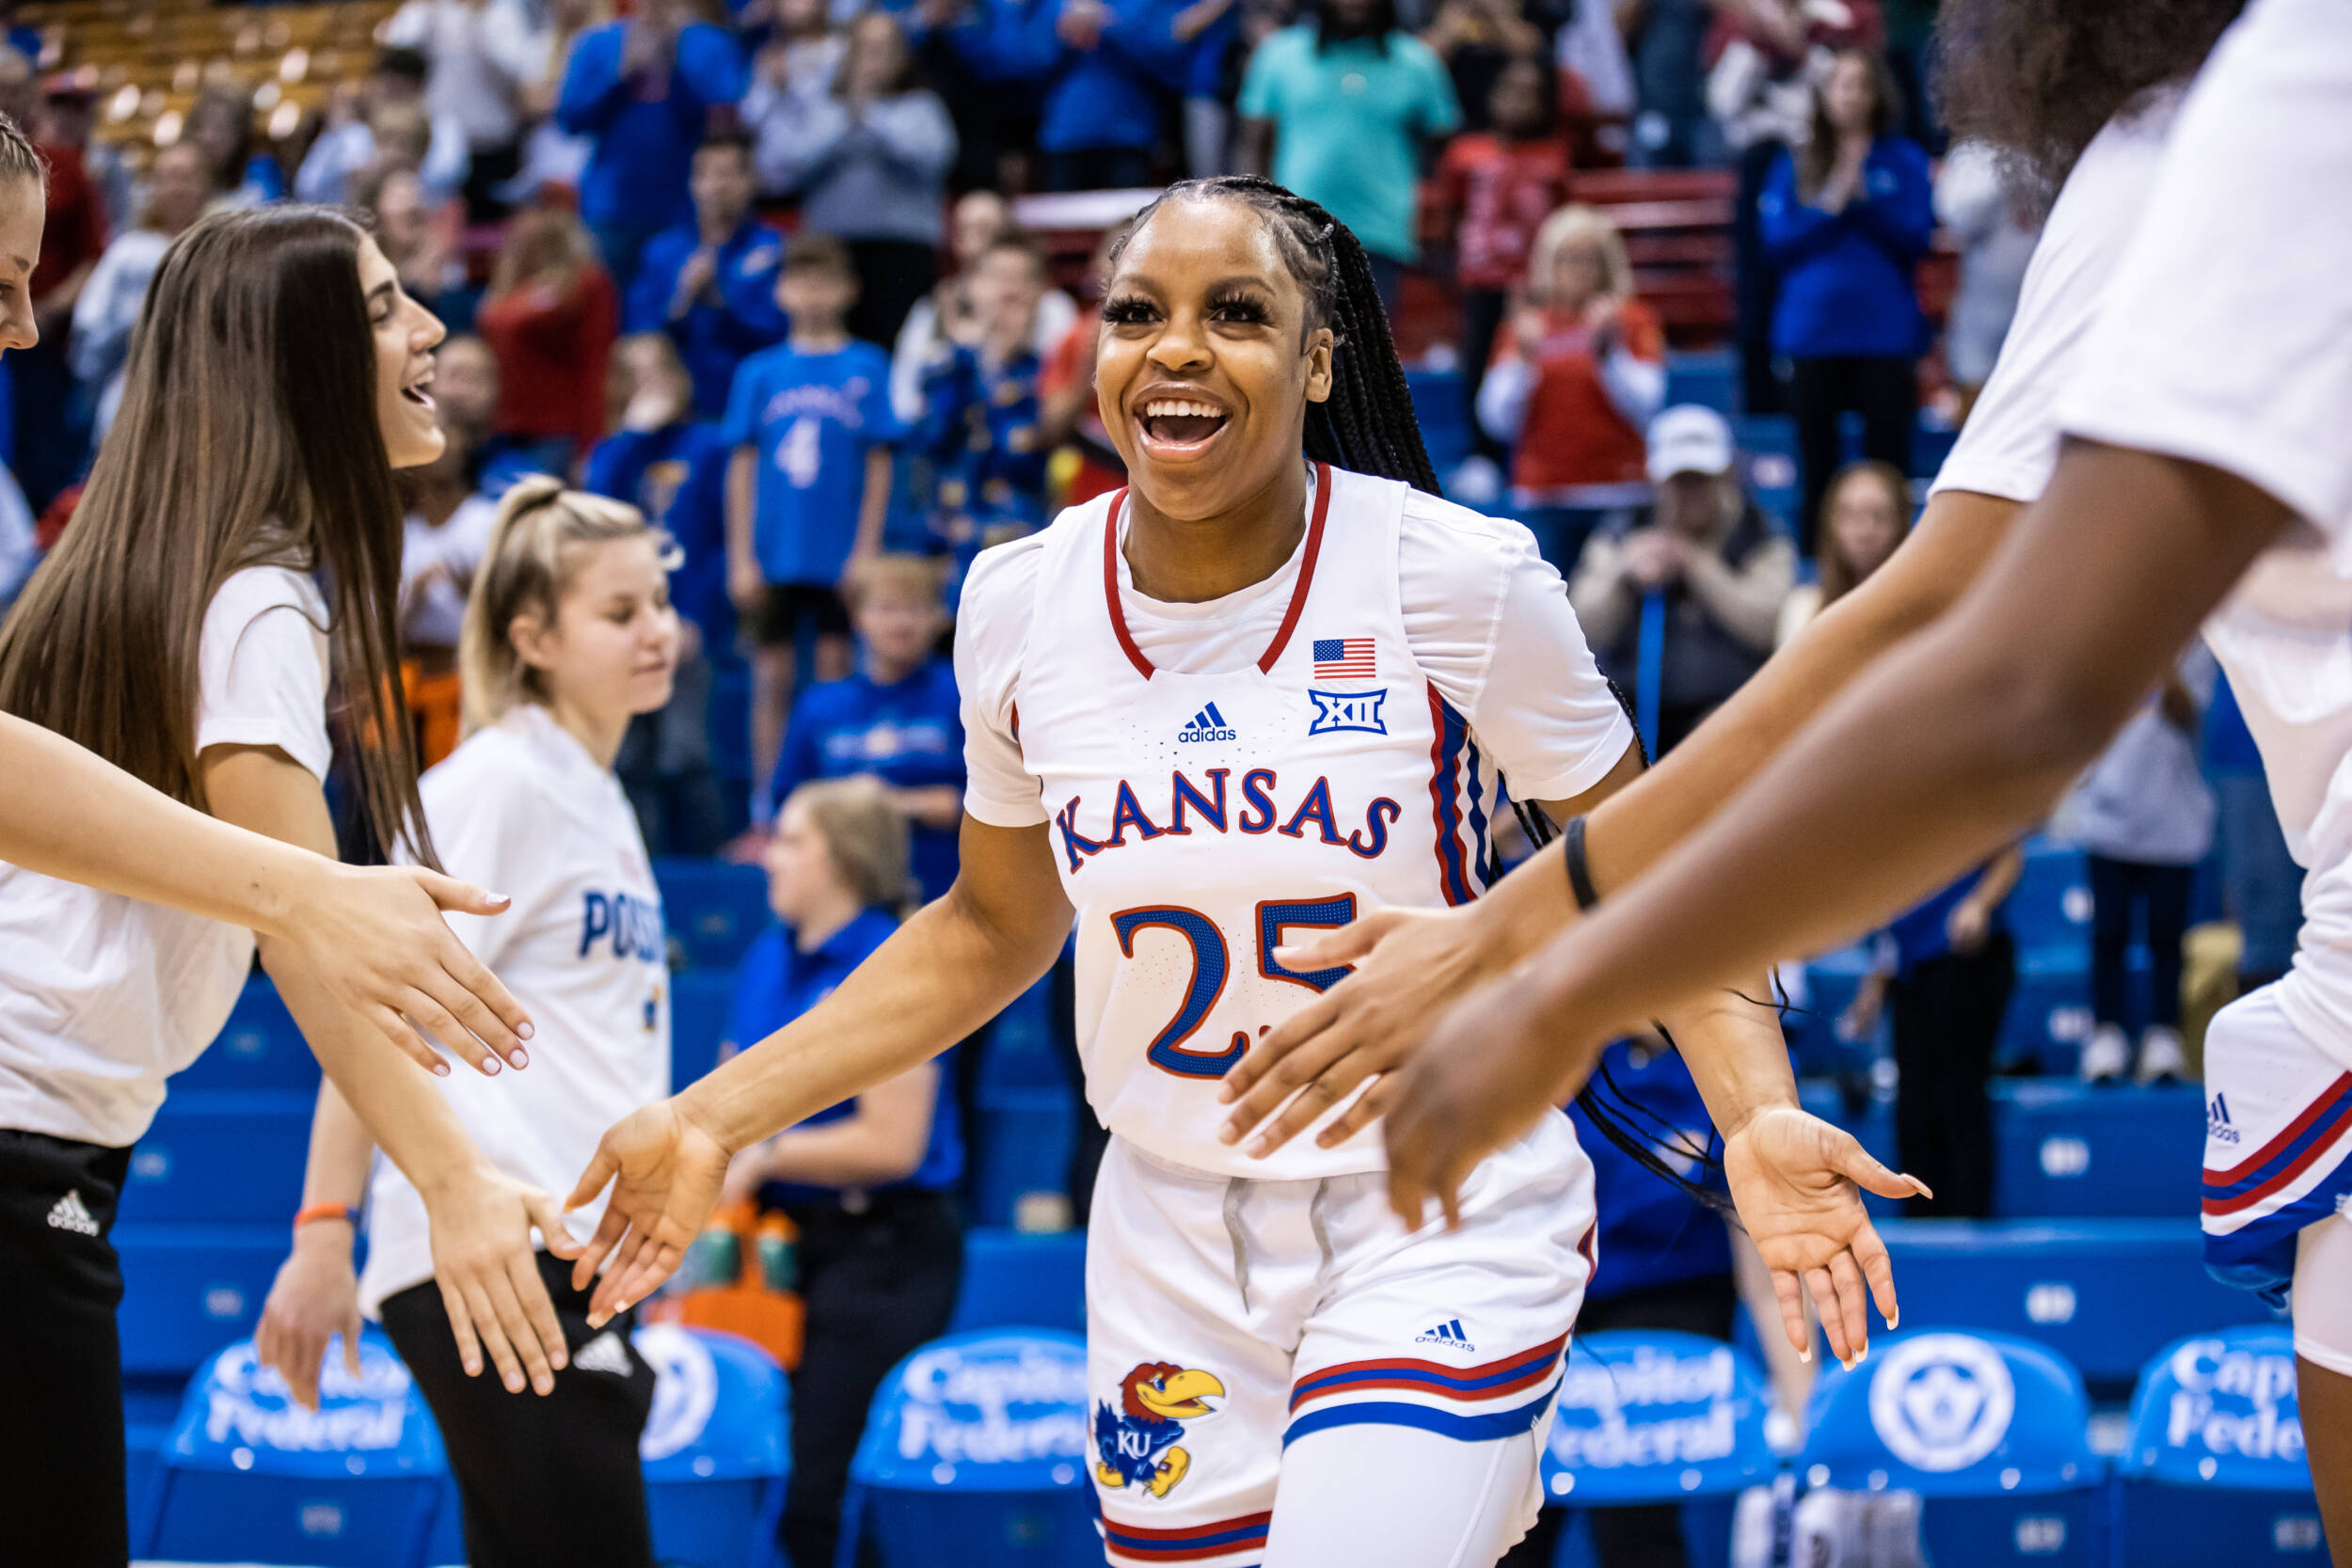 Game Primer: How to Watch, Key Players and Important Information for Kansas vs Maine